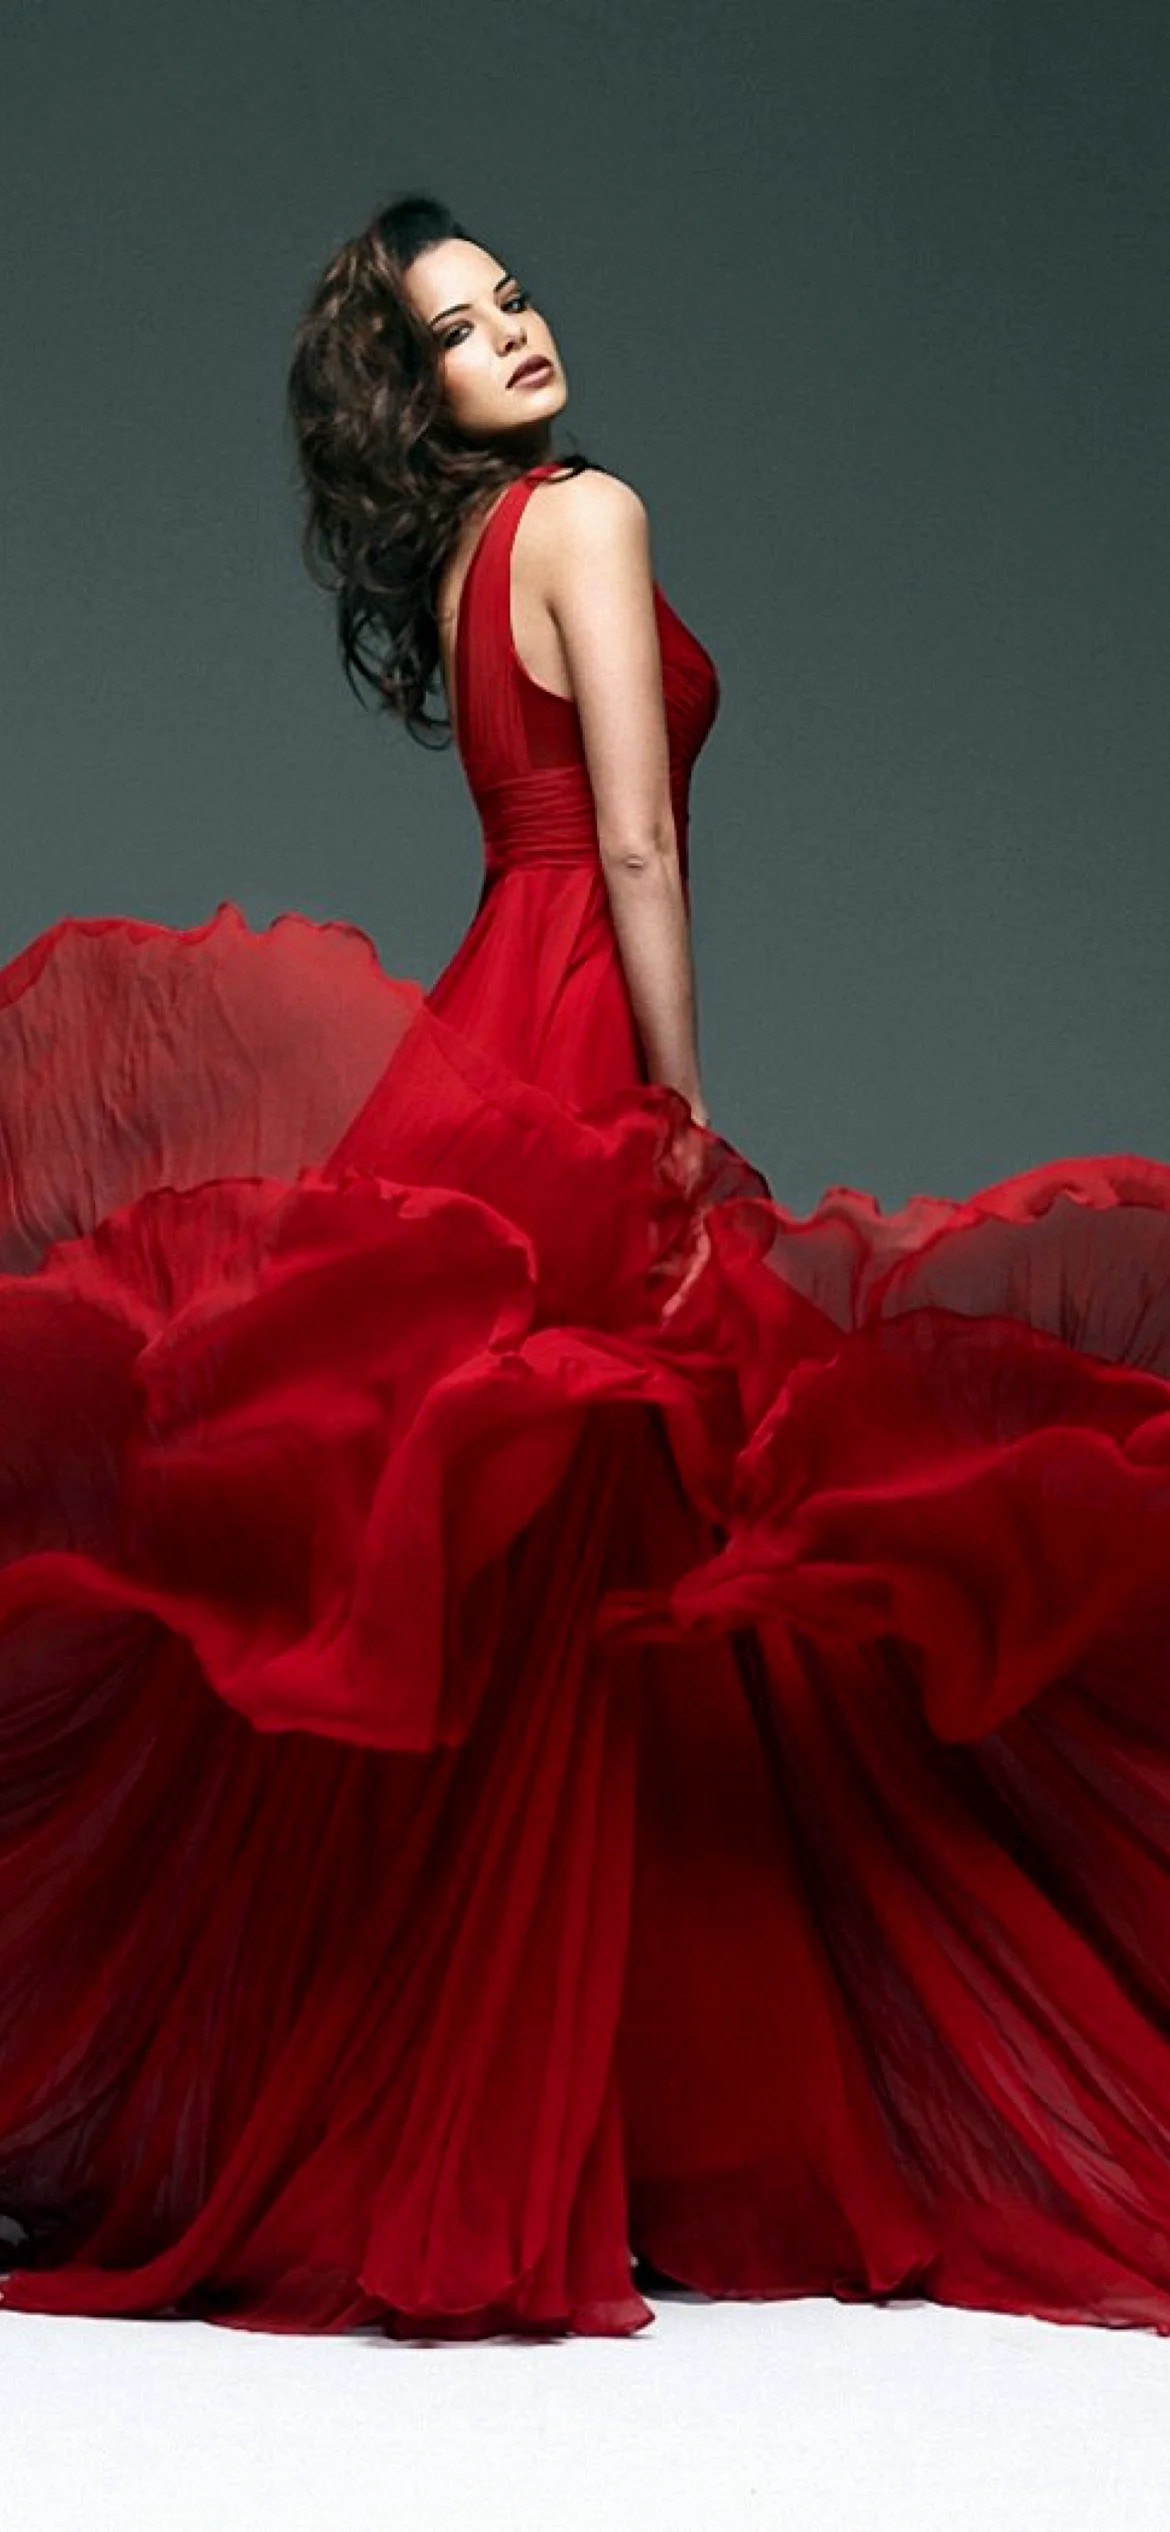 Red Dress Wallpaper for iPhone 14